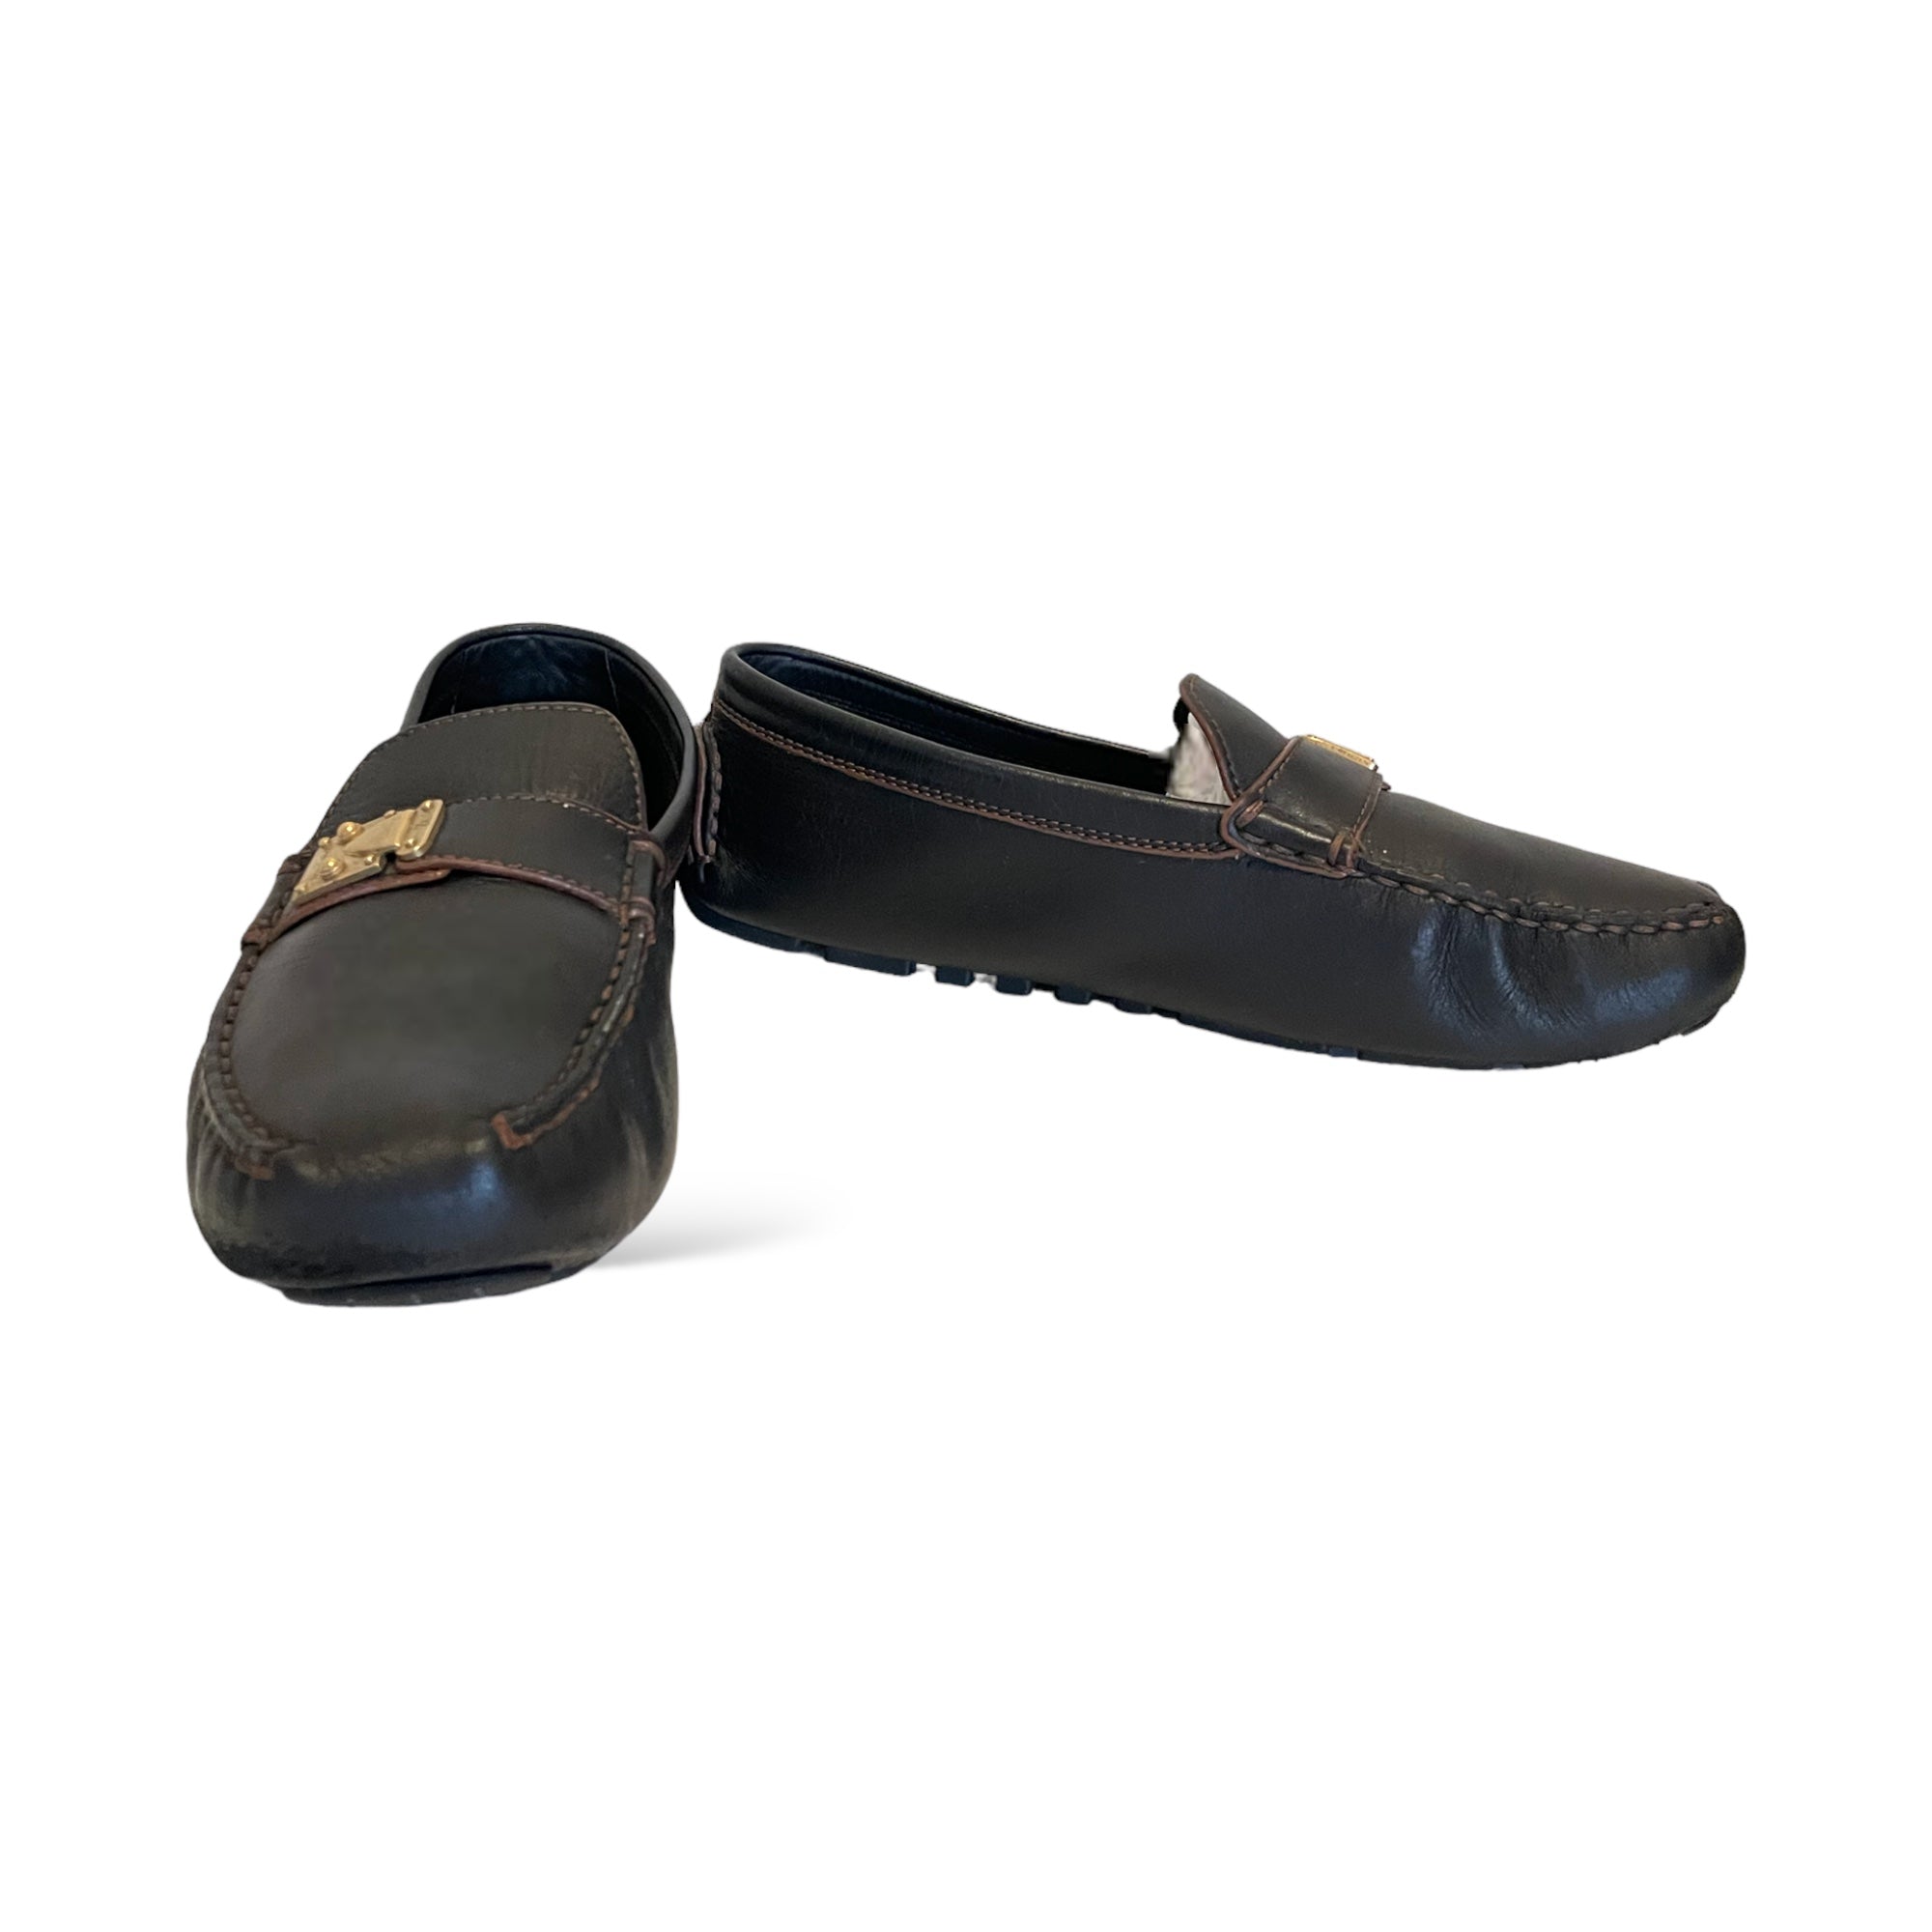 LOUIS VUITTON Vintage Suhali Leather Loafers |Size: 37.5|